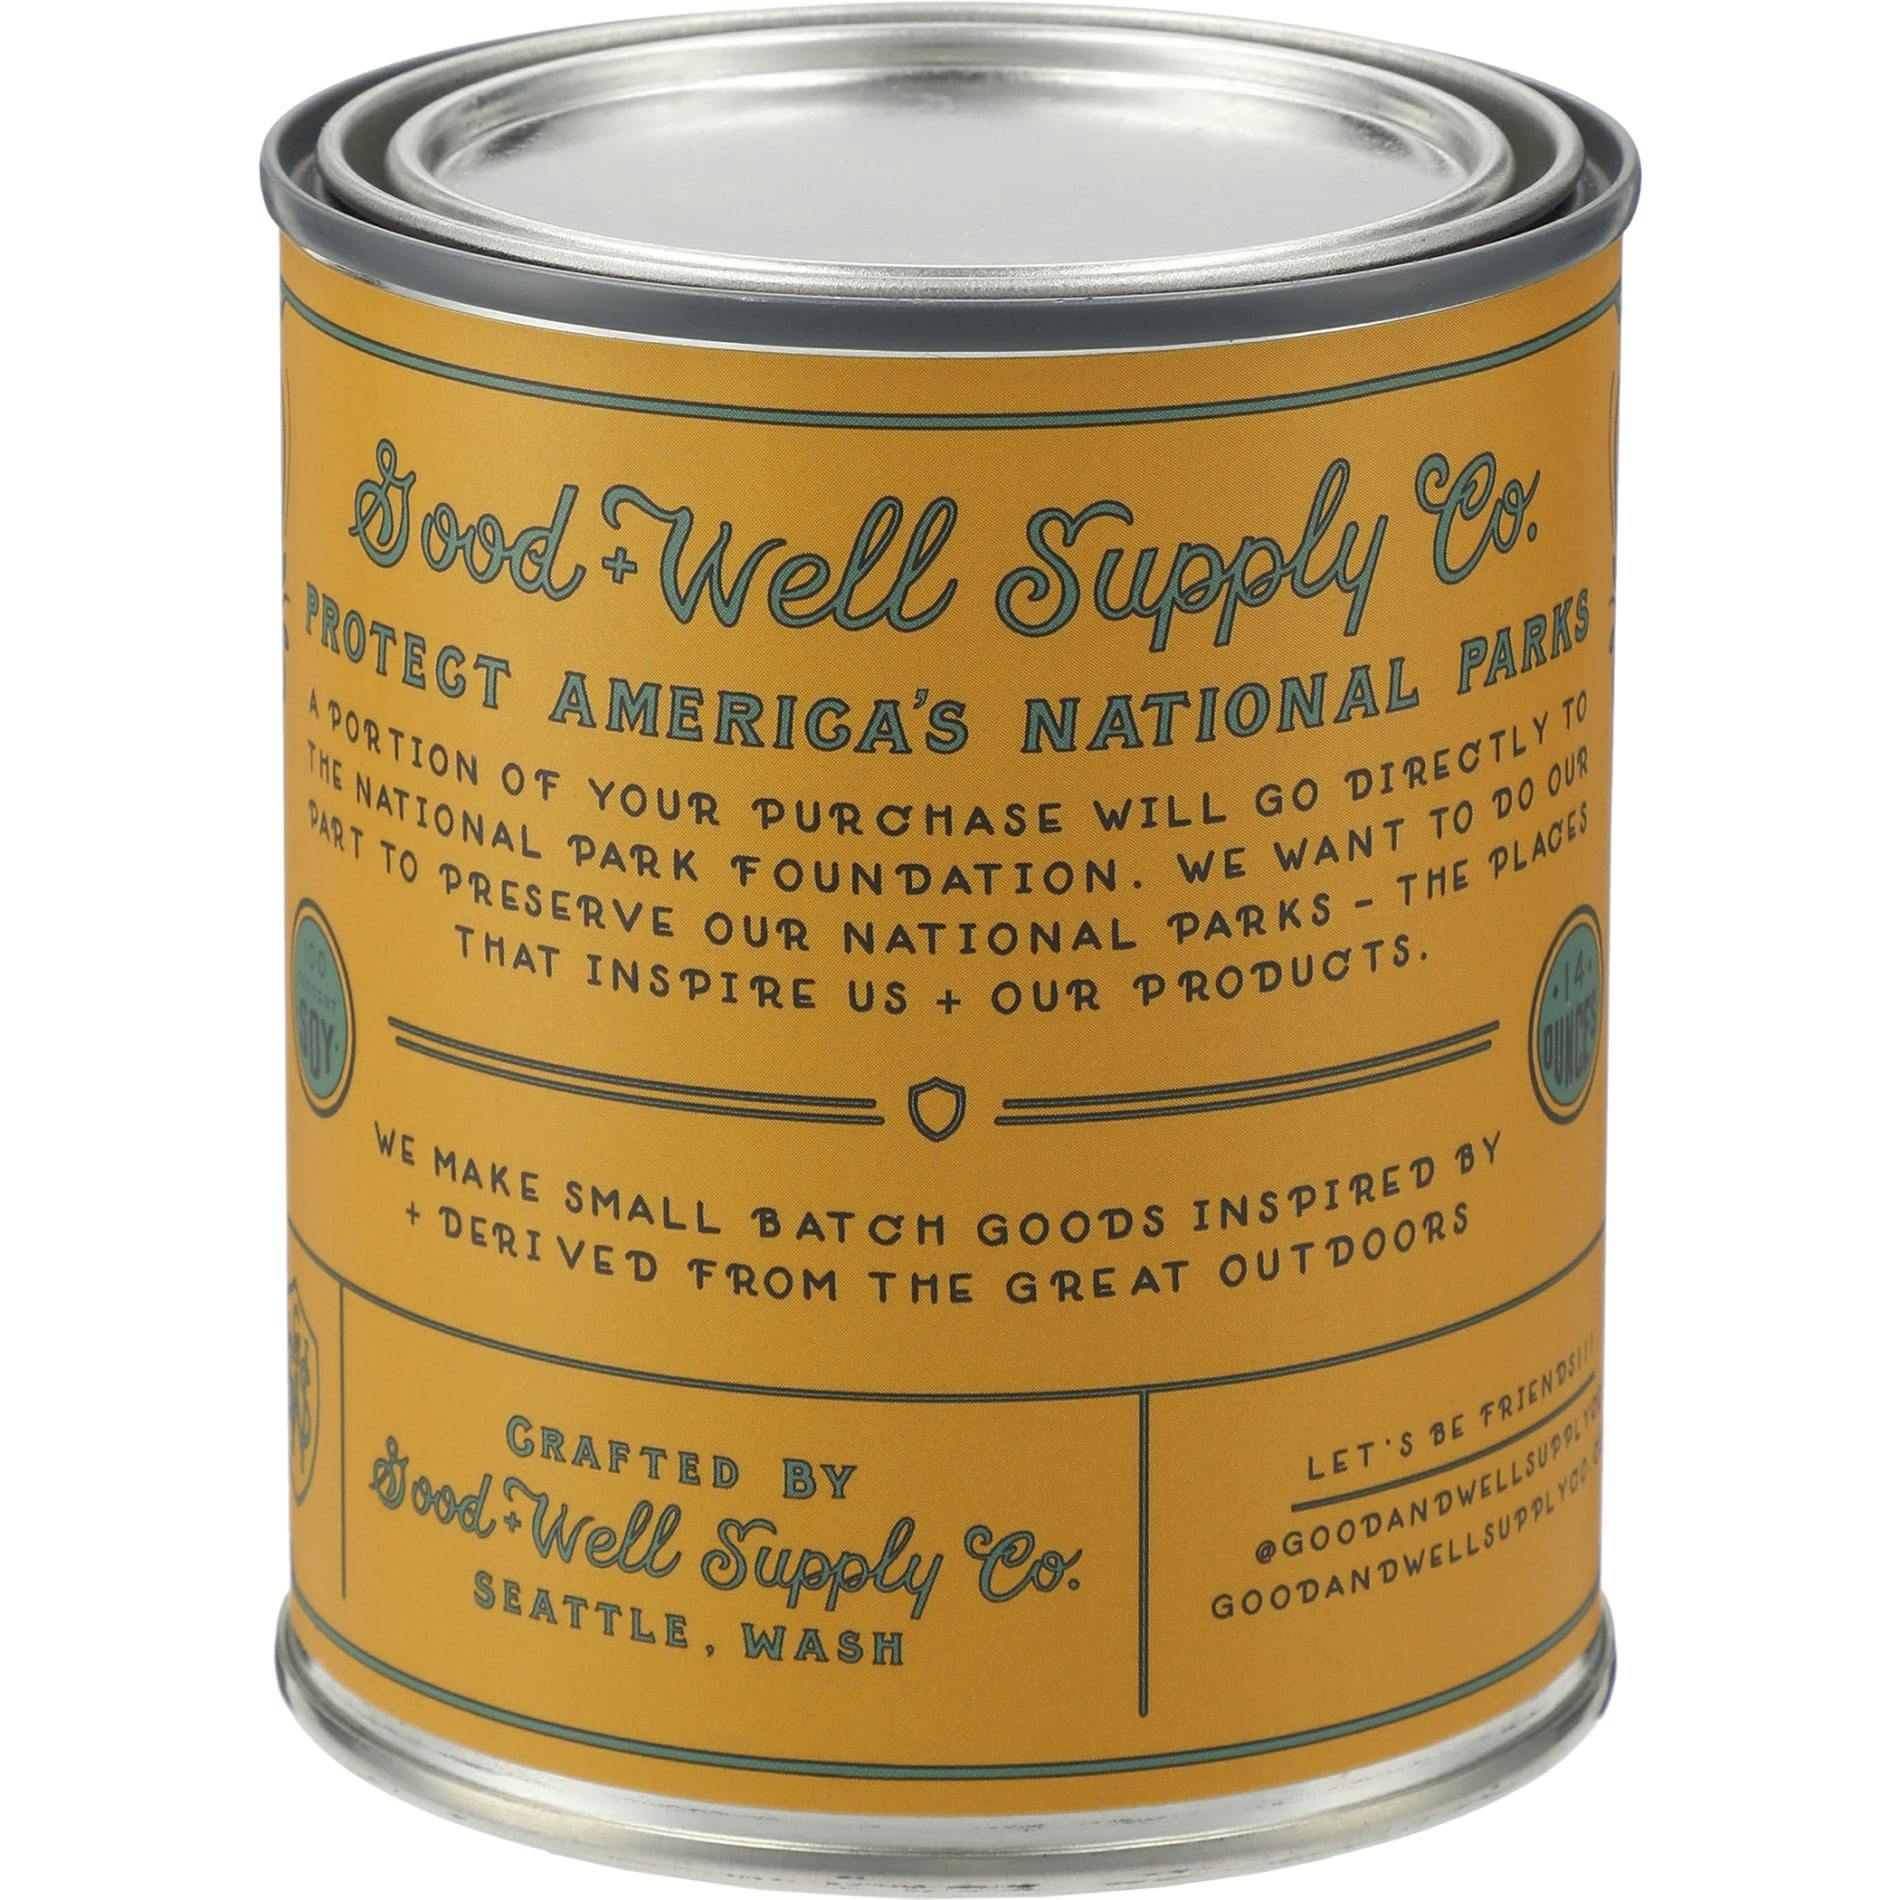 Zion National Park 14 oz Candle - additional Image 4